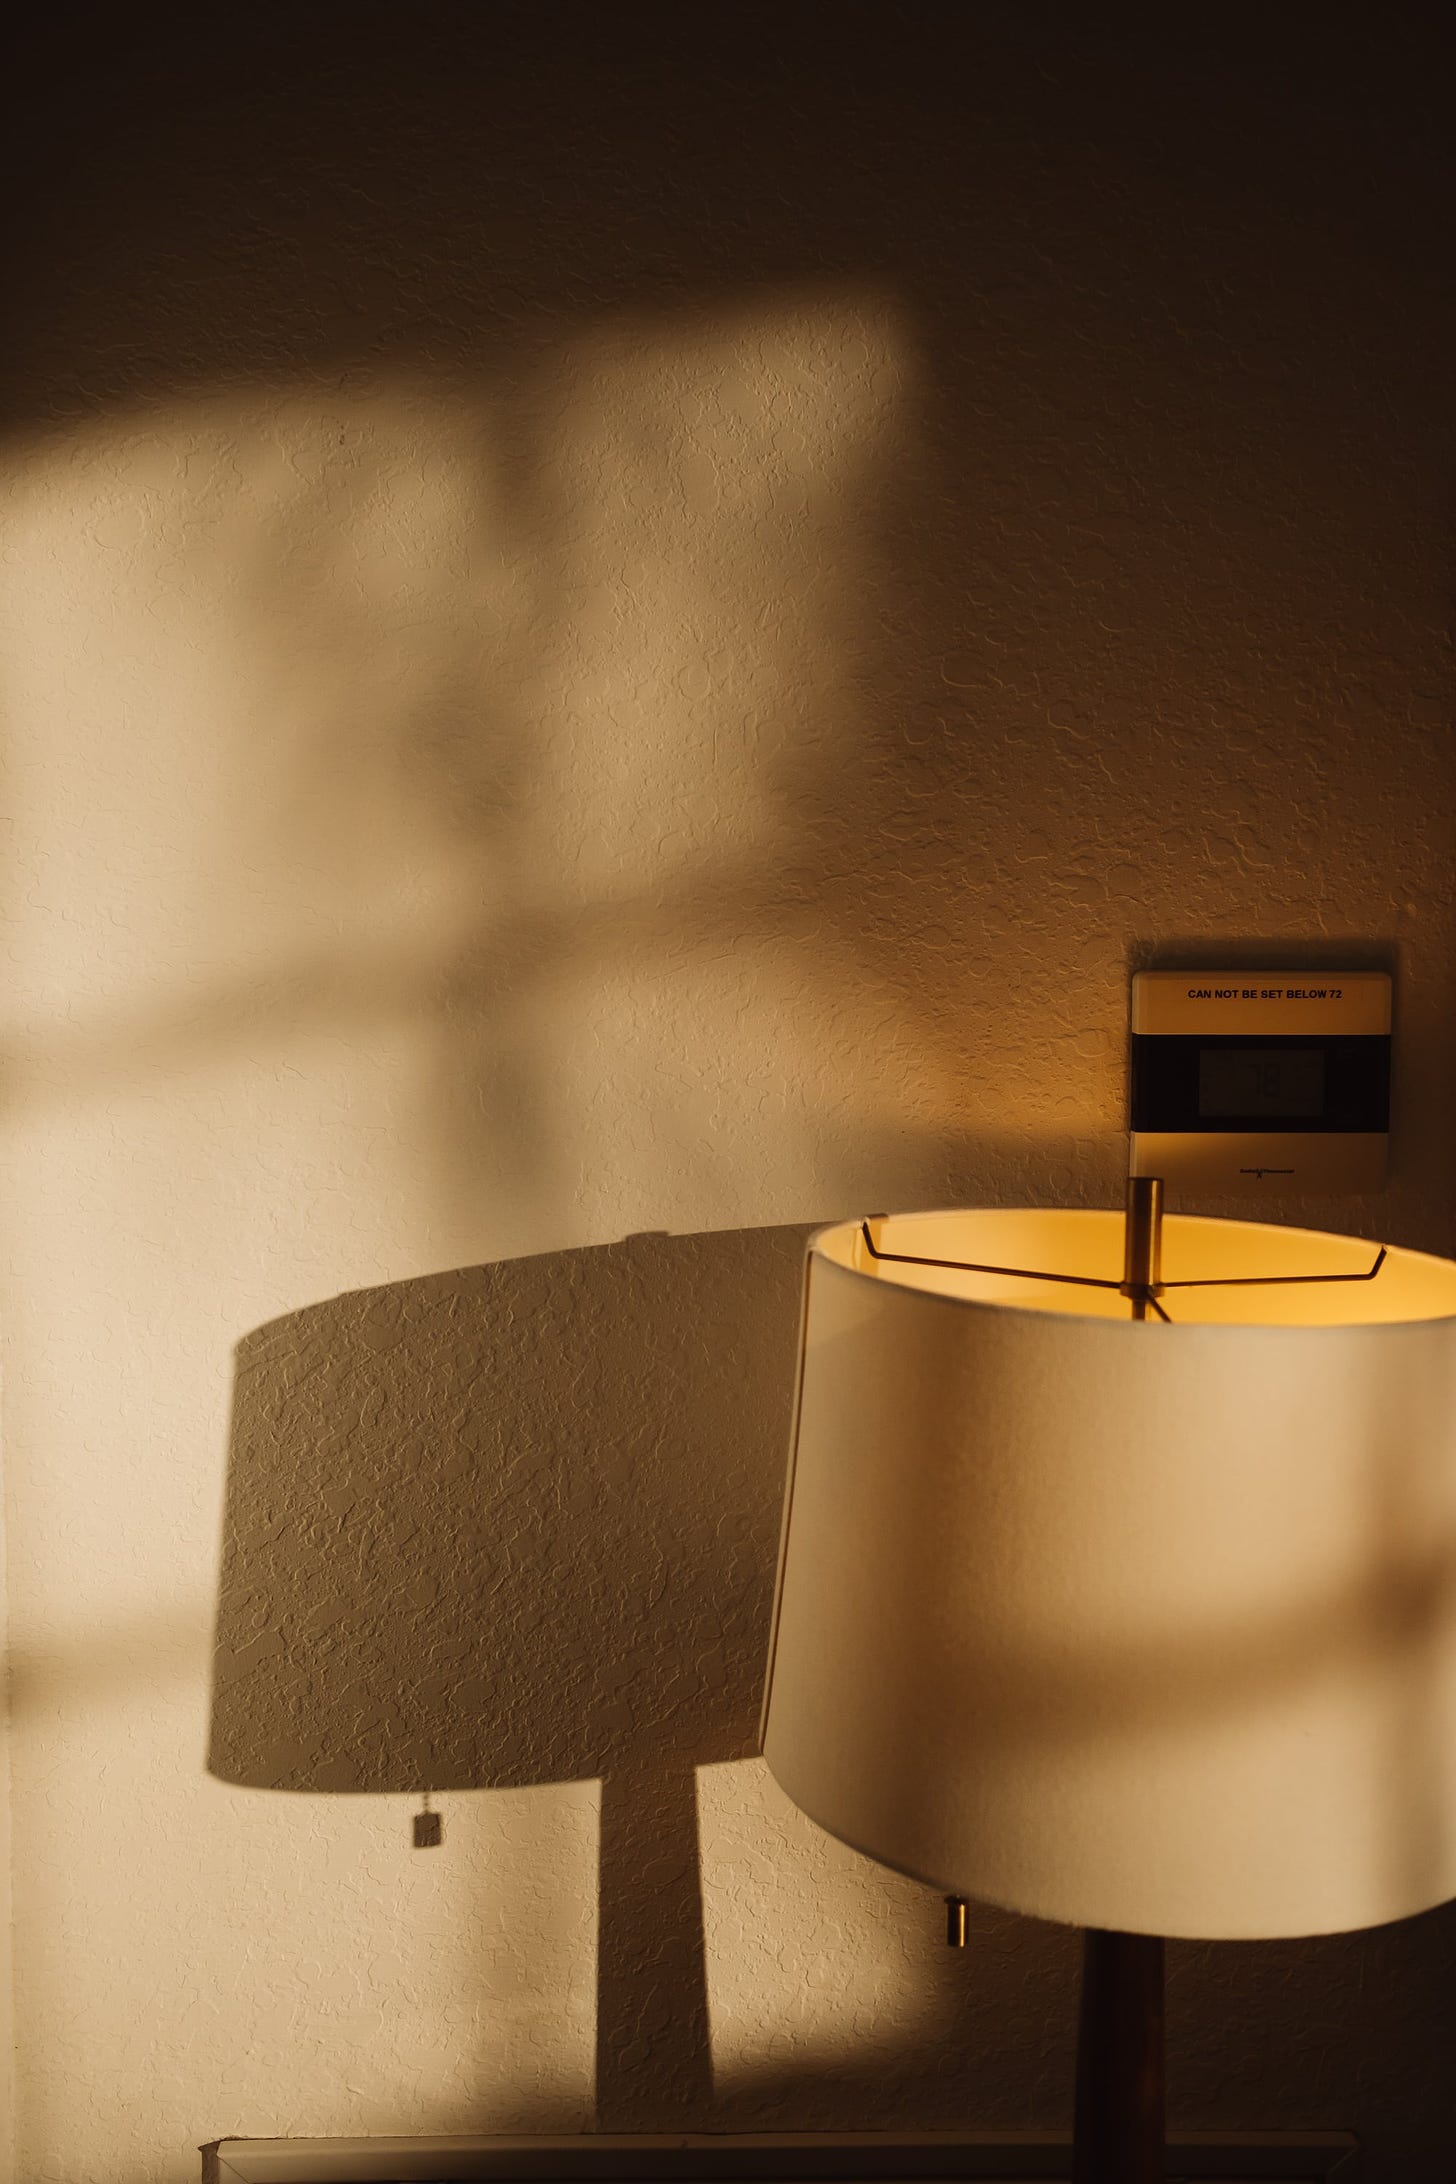 Sunset indoors; the golden light casting dappled shadows on the wall. A lamp switched on and the thermostat that says "CAN NOT BE SET BELOW 72"